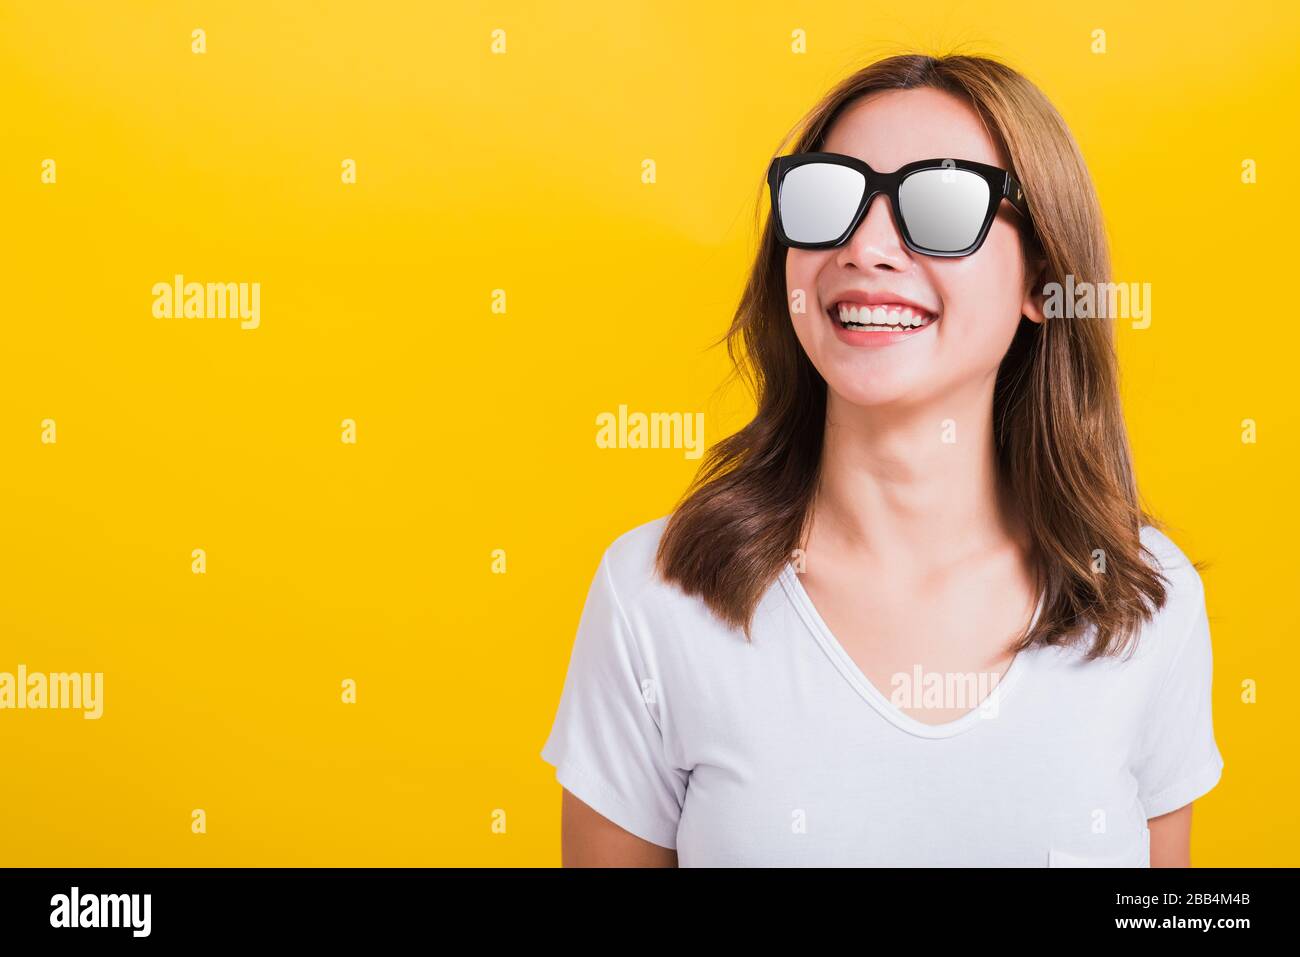 Portrait Asian Thai beautiful young woman happy smiling white teeth with sunglasses and looking side space, studio shot isolated on yellow background, Stock Photo